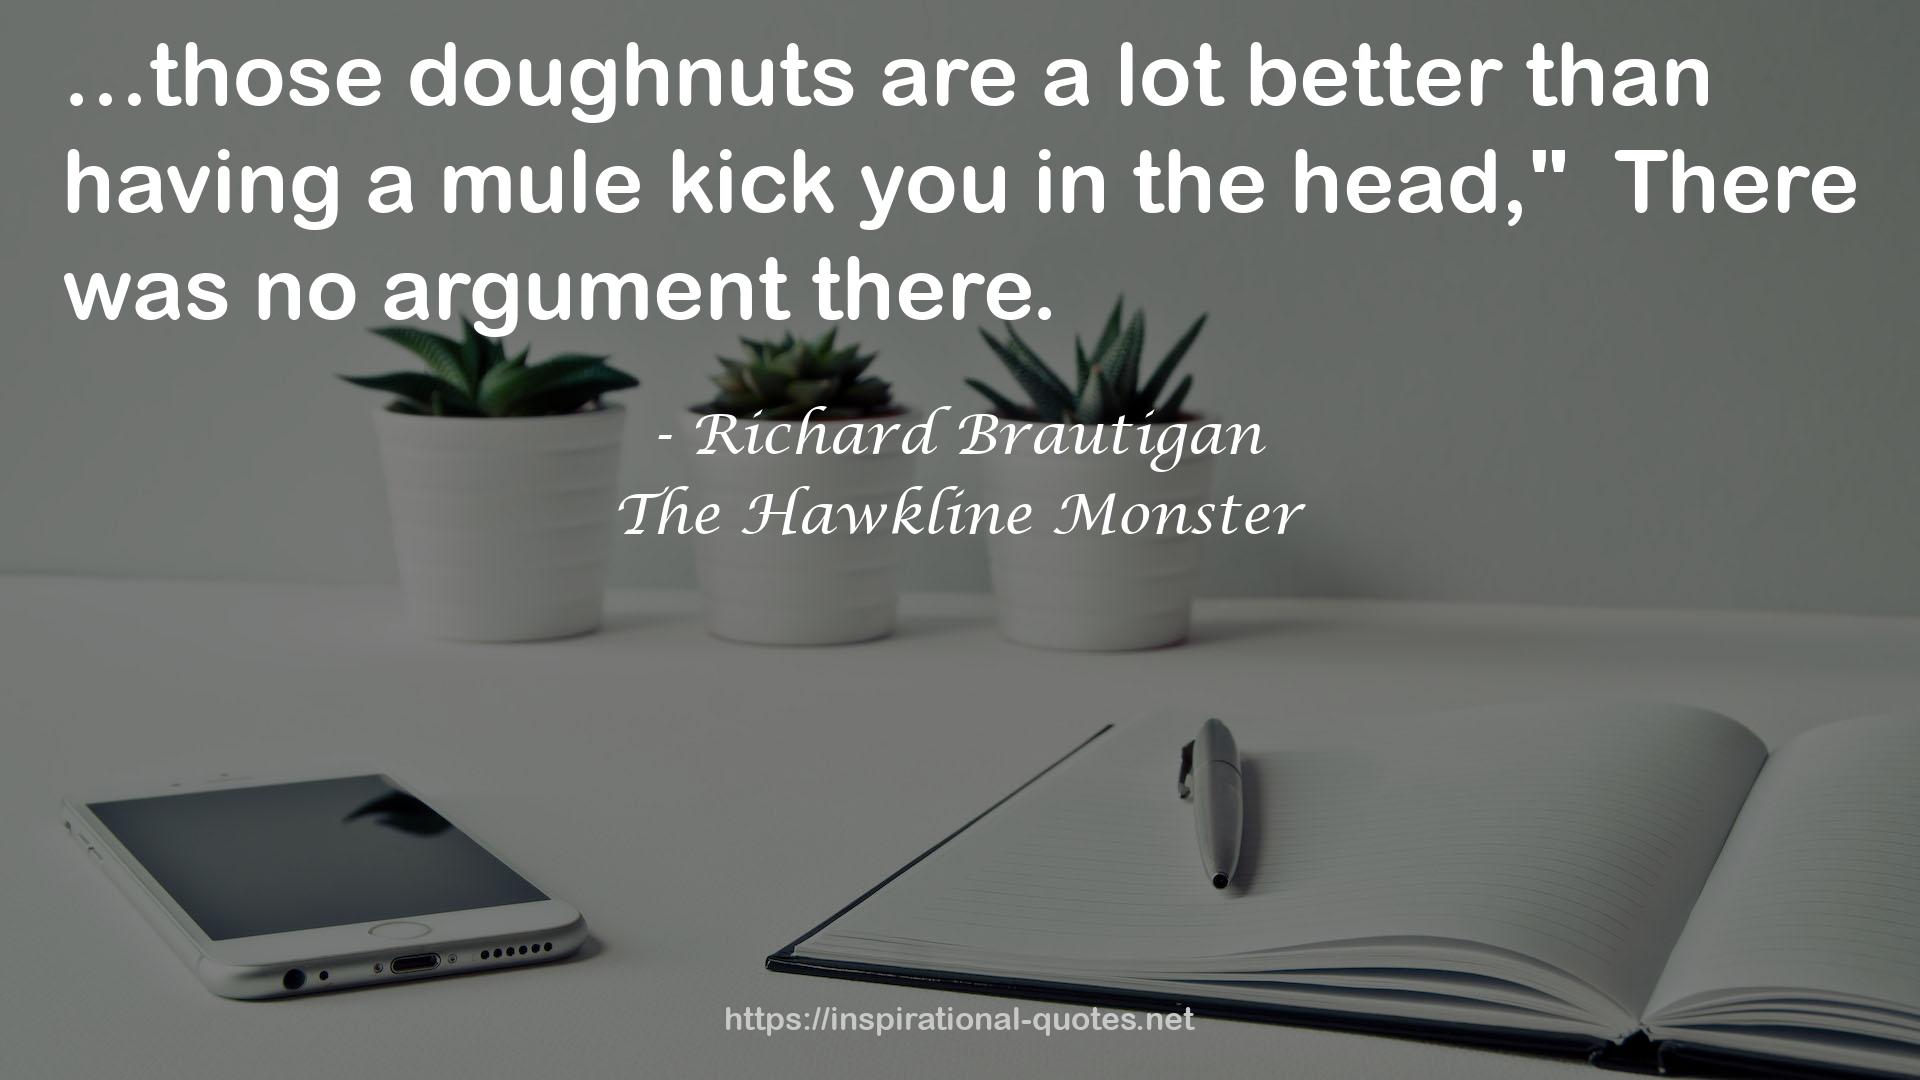 The Hawkline Monster QUOTES